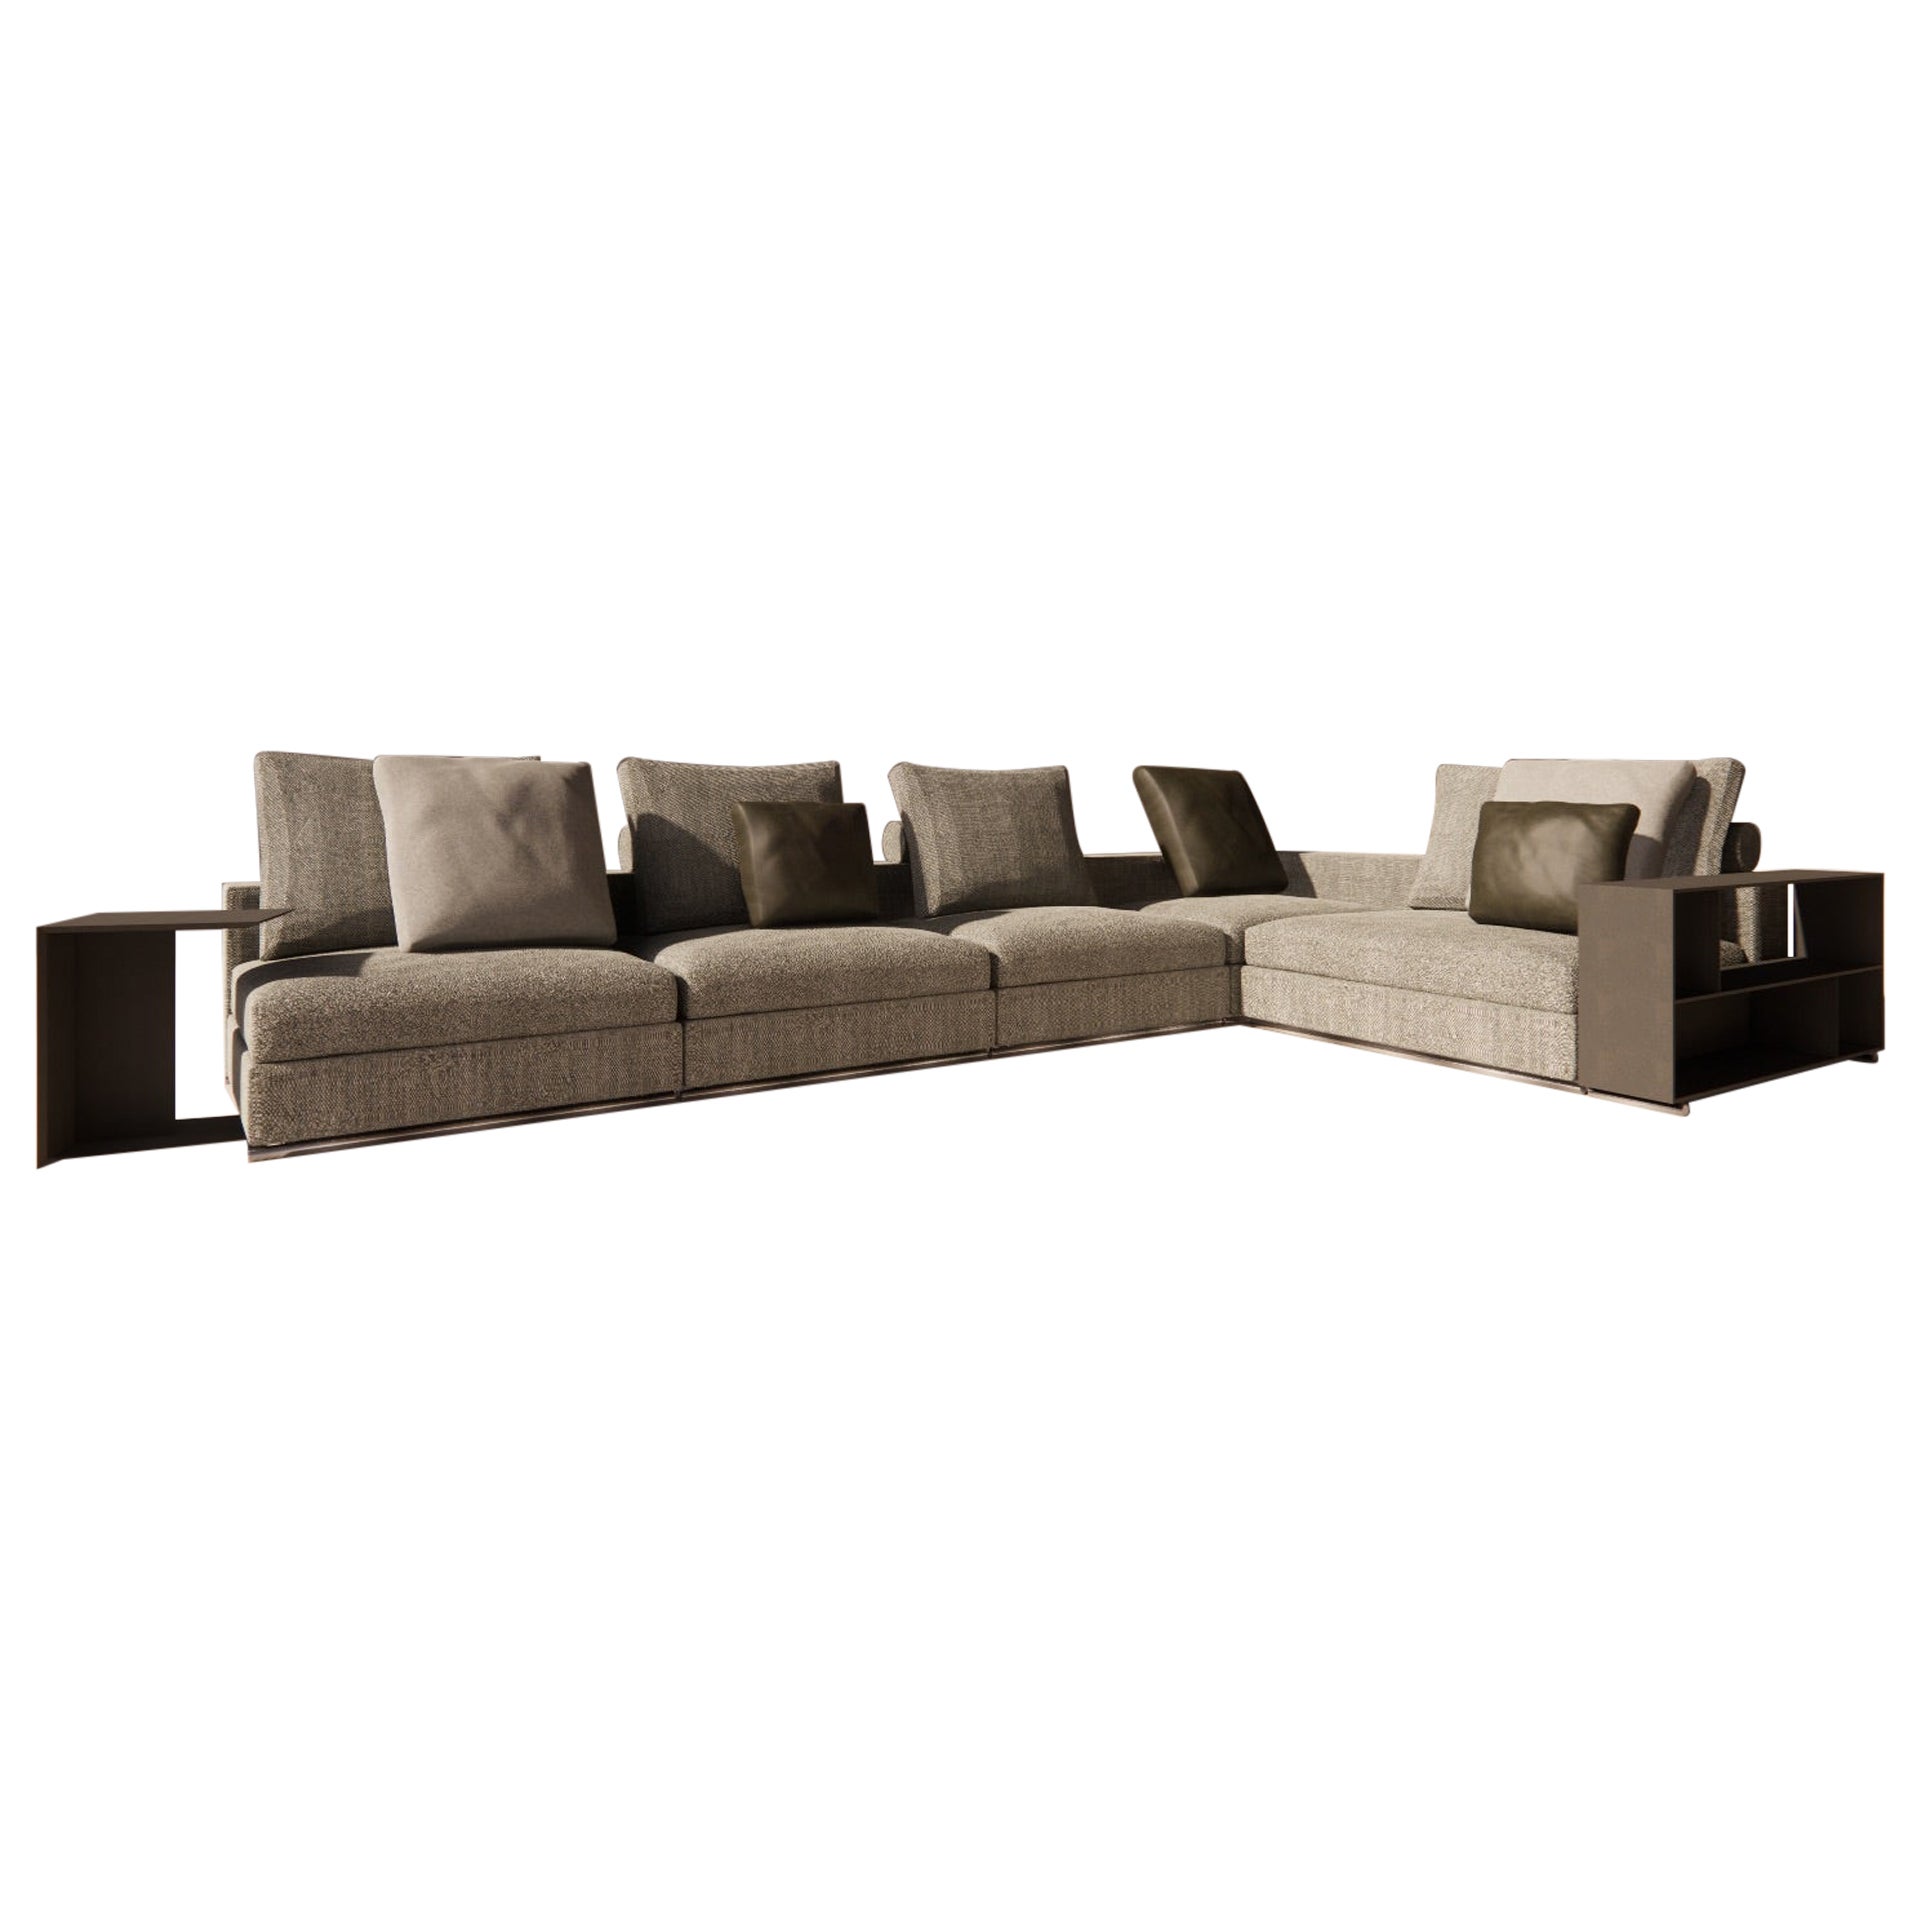 Groundpiece Modular Sofa in Topazio 991 by Flexform, Imported from Italy For Sale